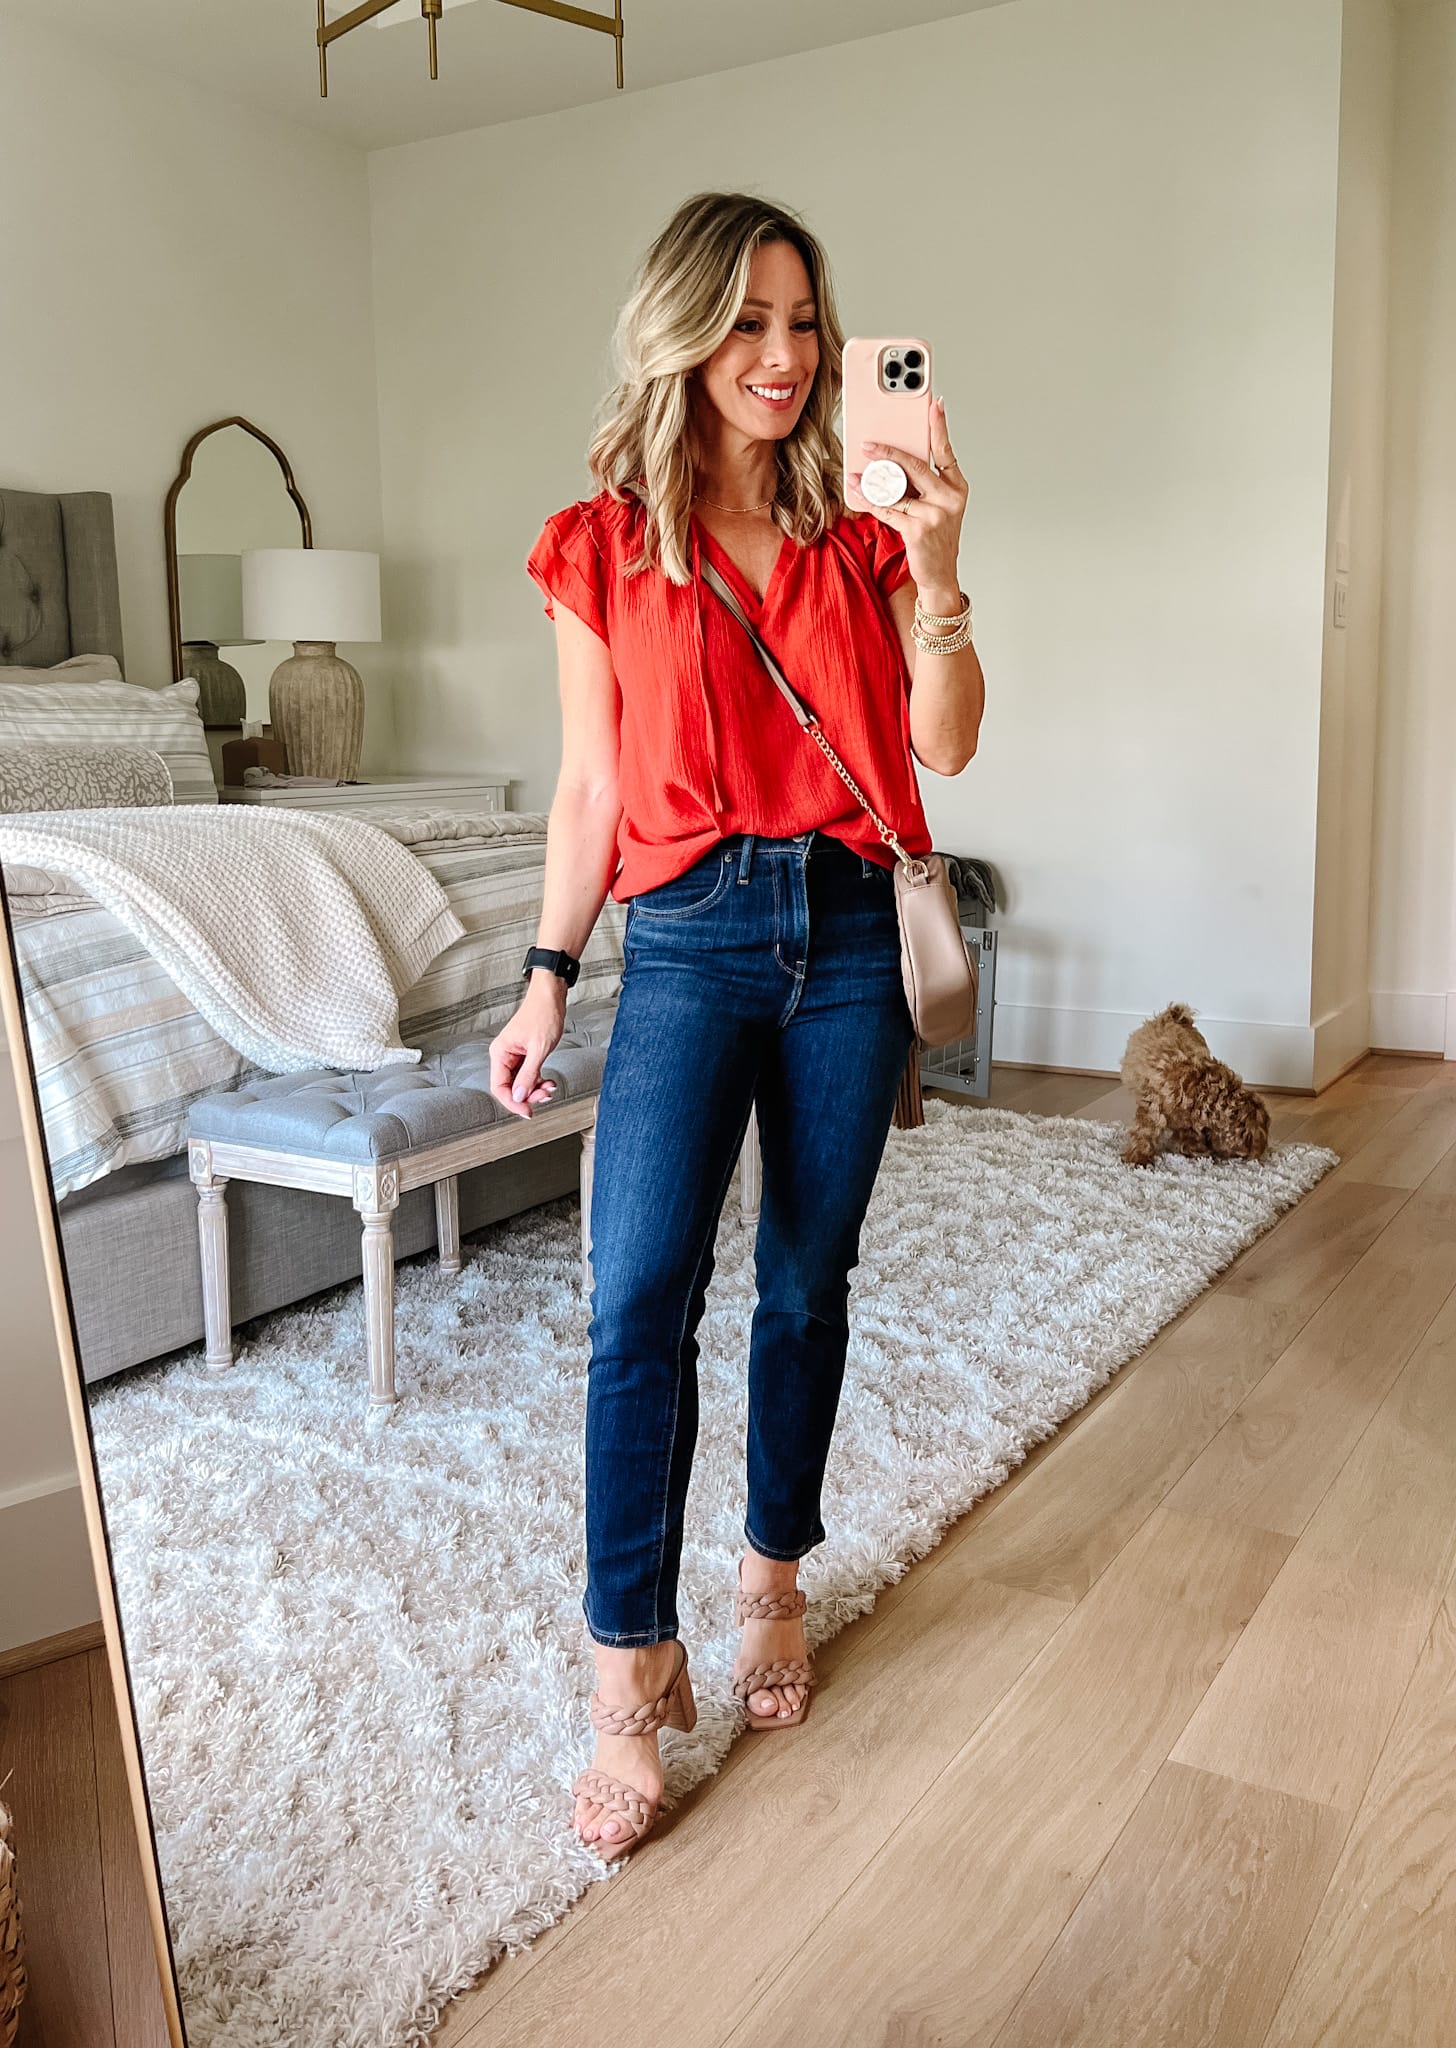 High heels and Jeans Outfit | ShopLook